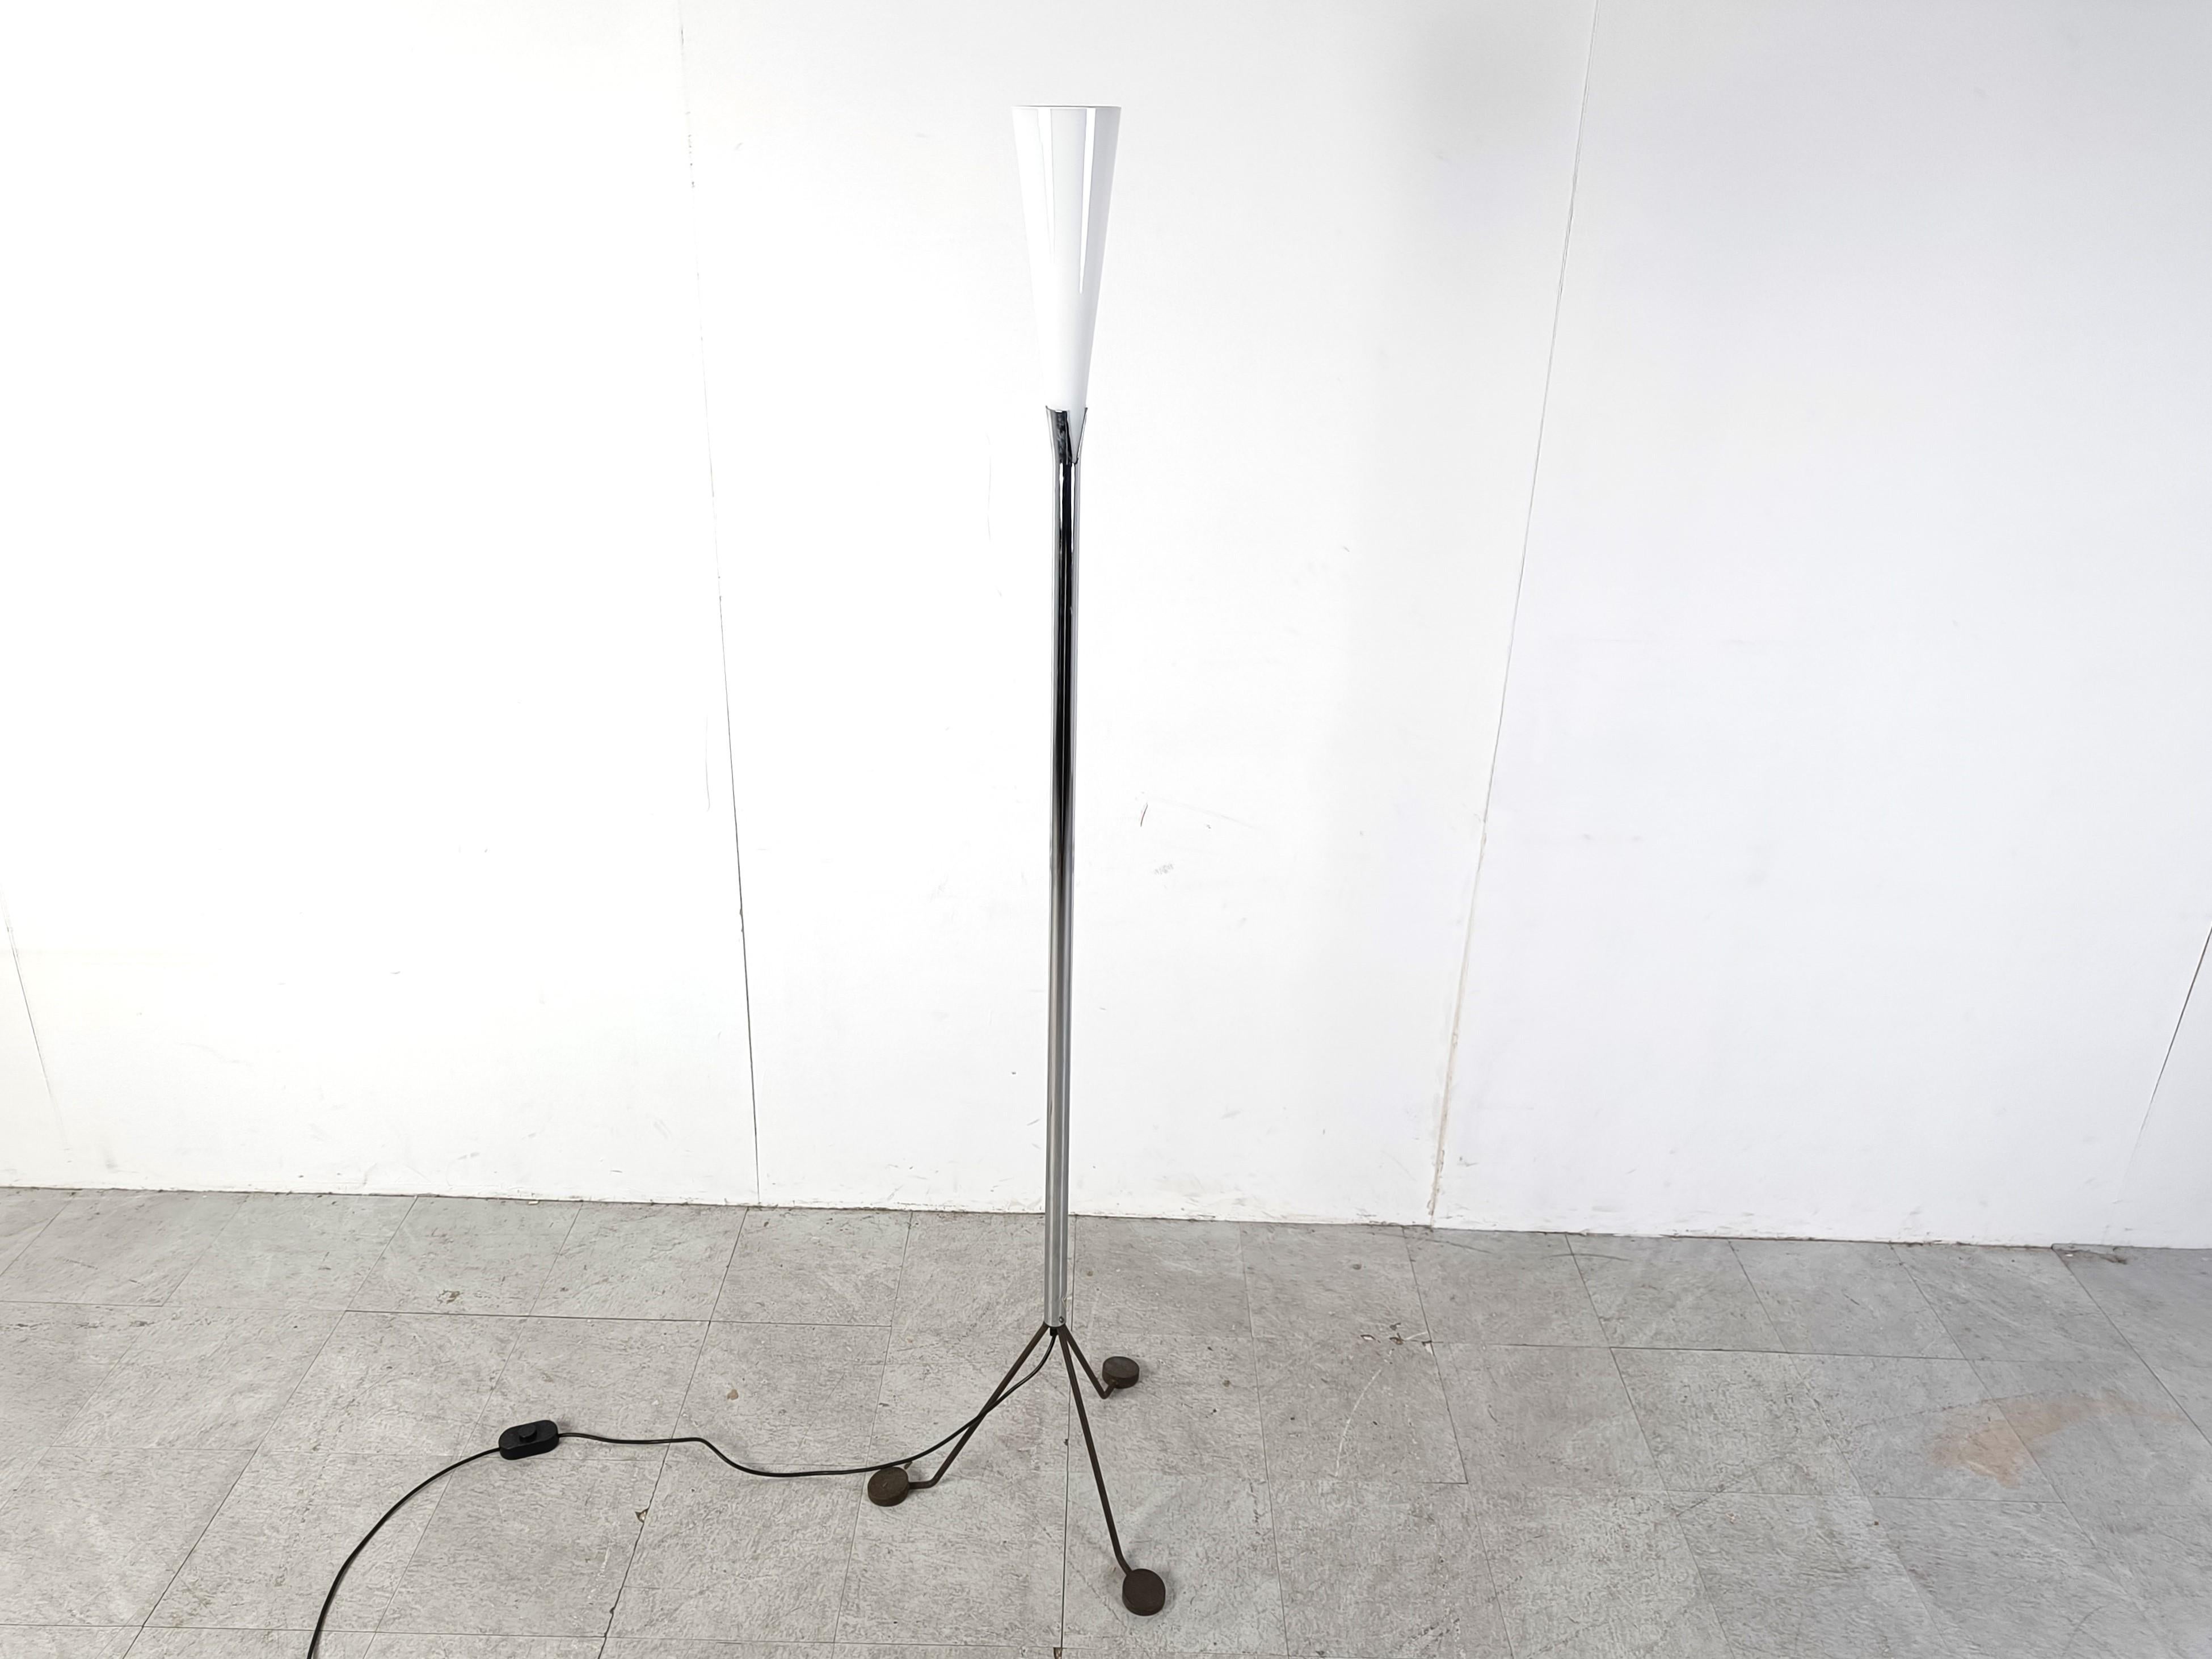 Vintage 'Line' floor lamp designed by Jeannot Cerutti for Veart.

The lamp has a metal tripod base and a murano glass conical lamp shade.

Good condition, tested and ready for use.

1990s - Italy

Height: 190cm/74.80